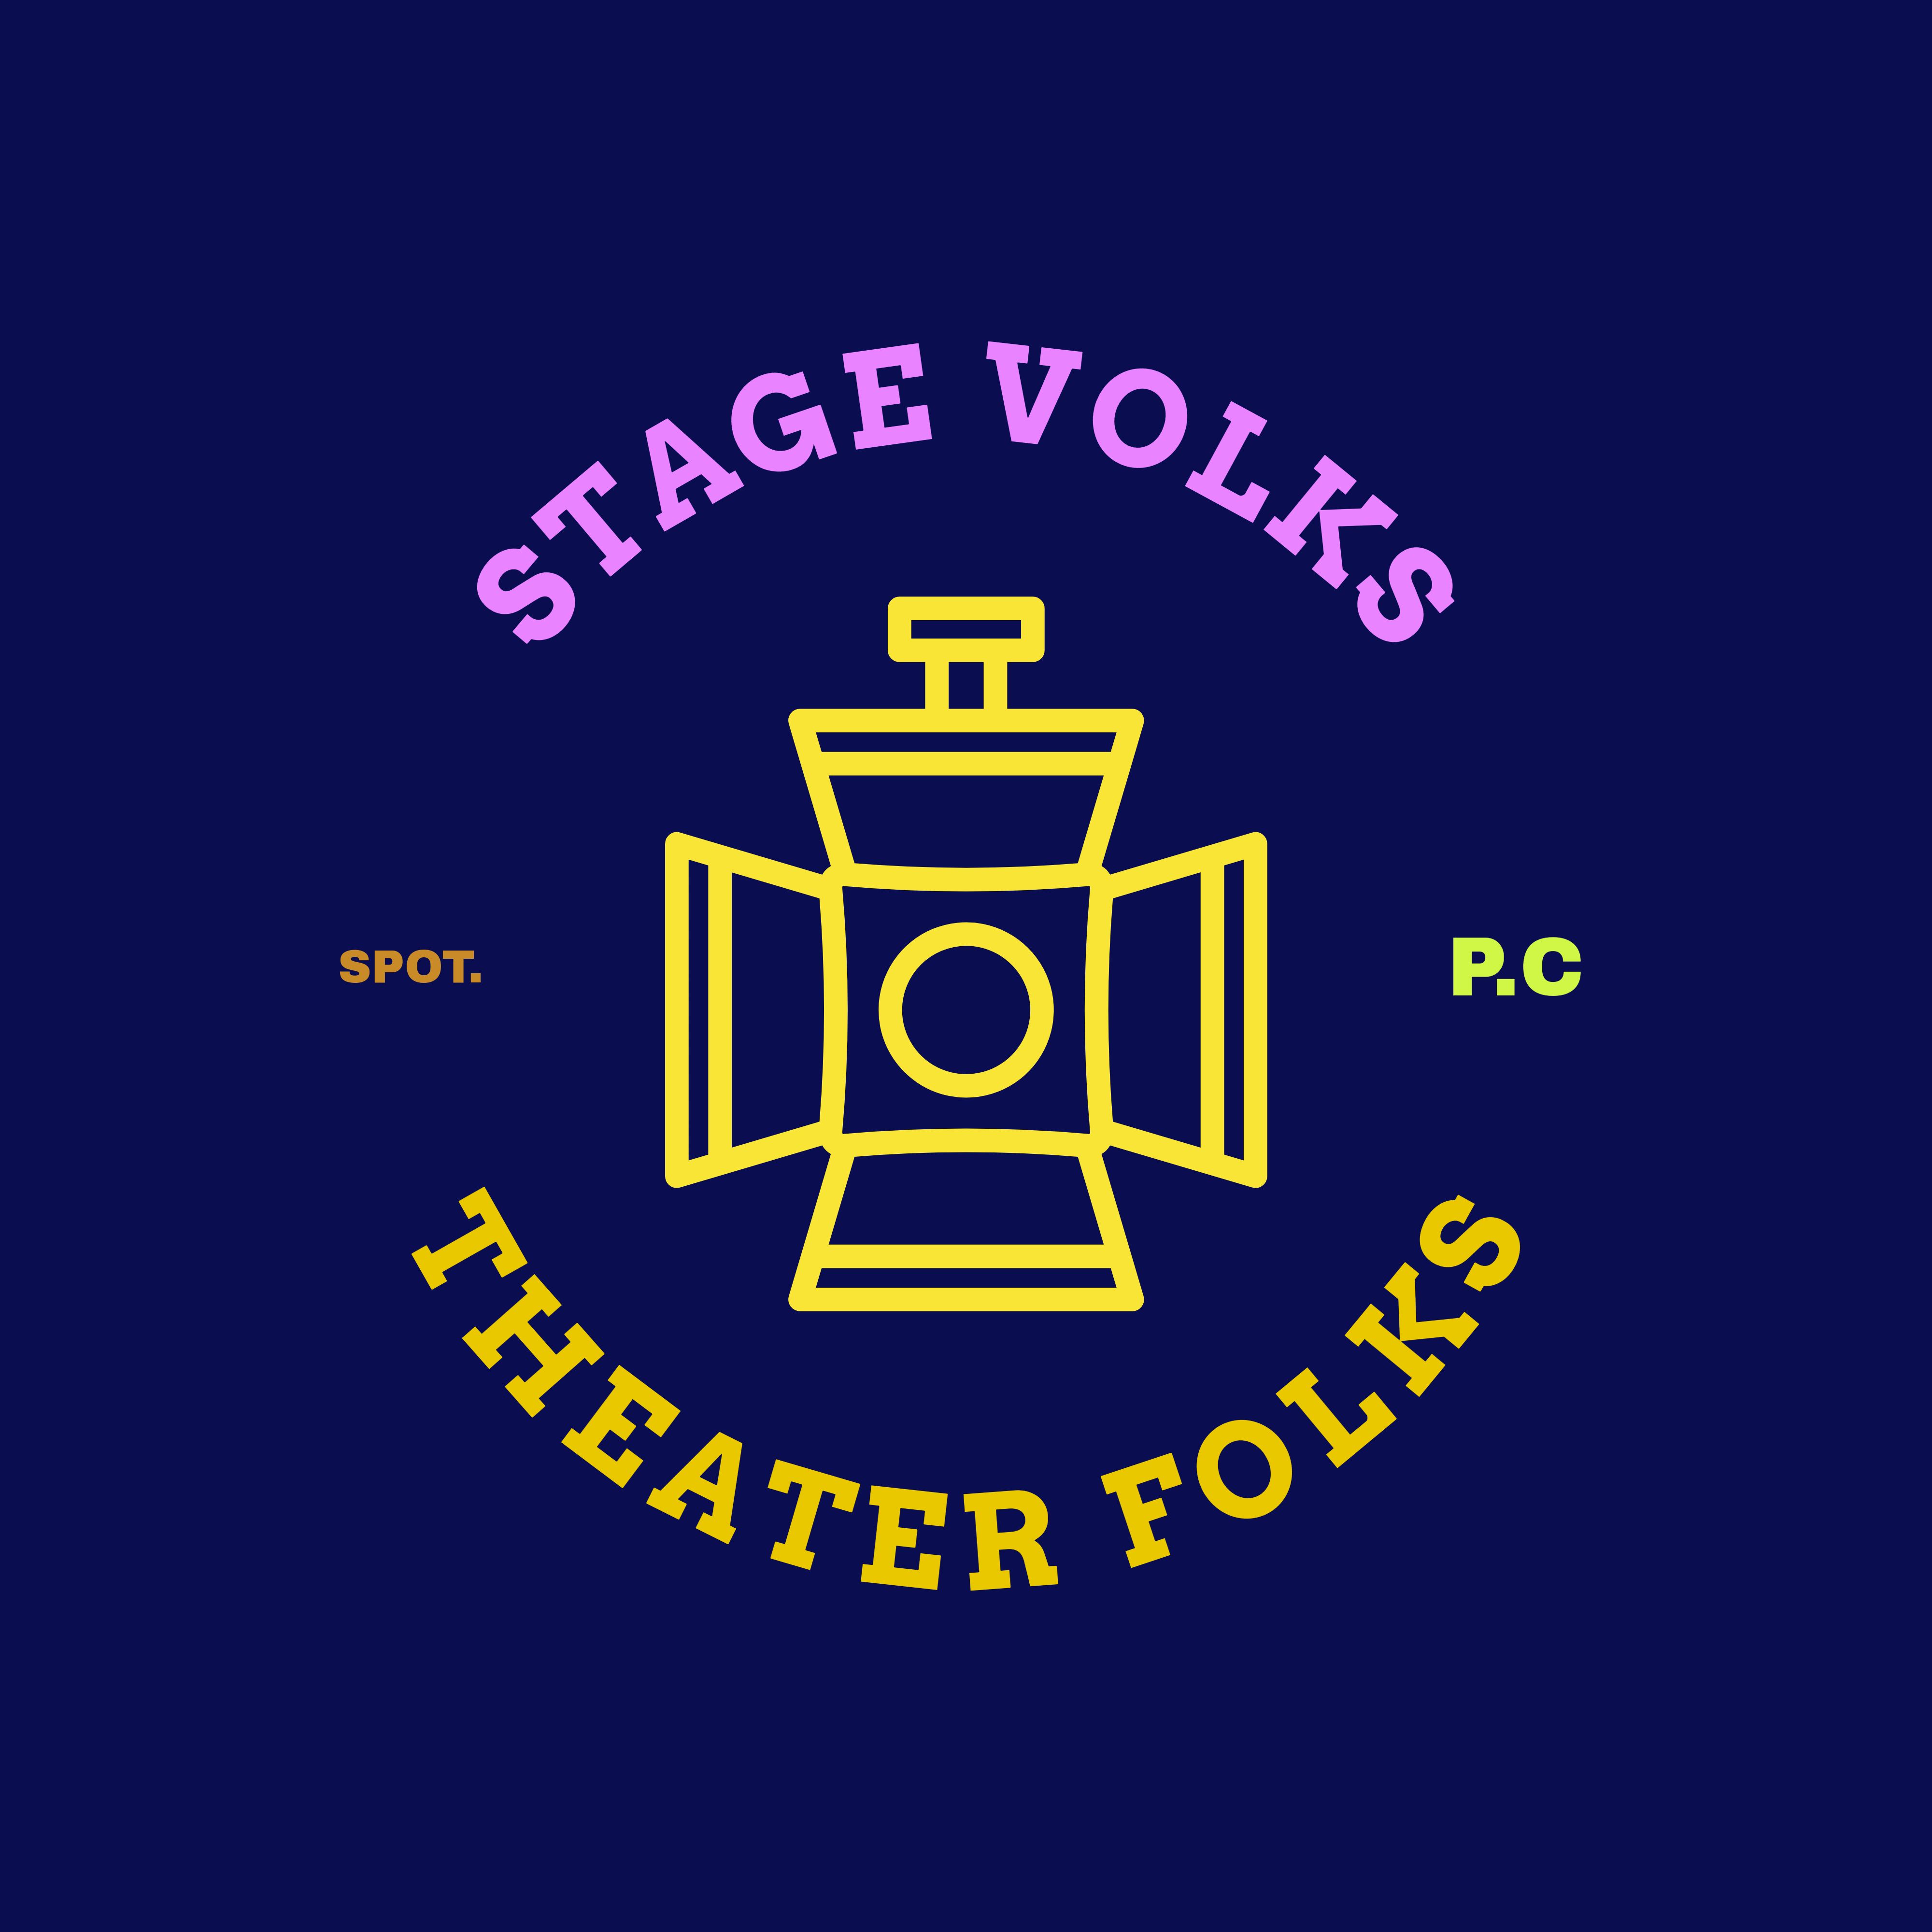 Stage Volks Podcast